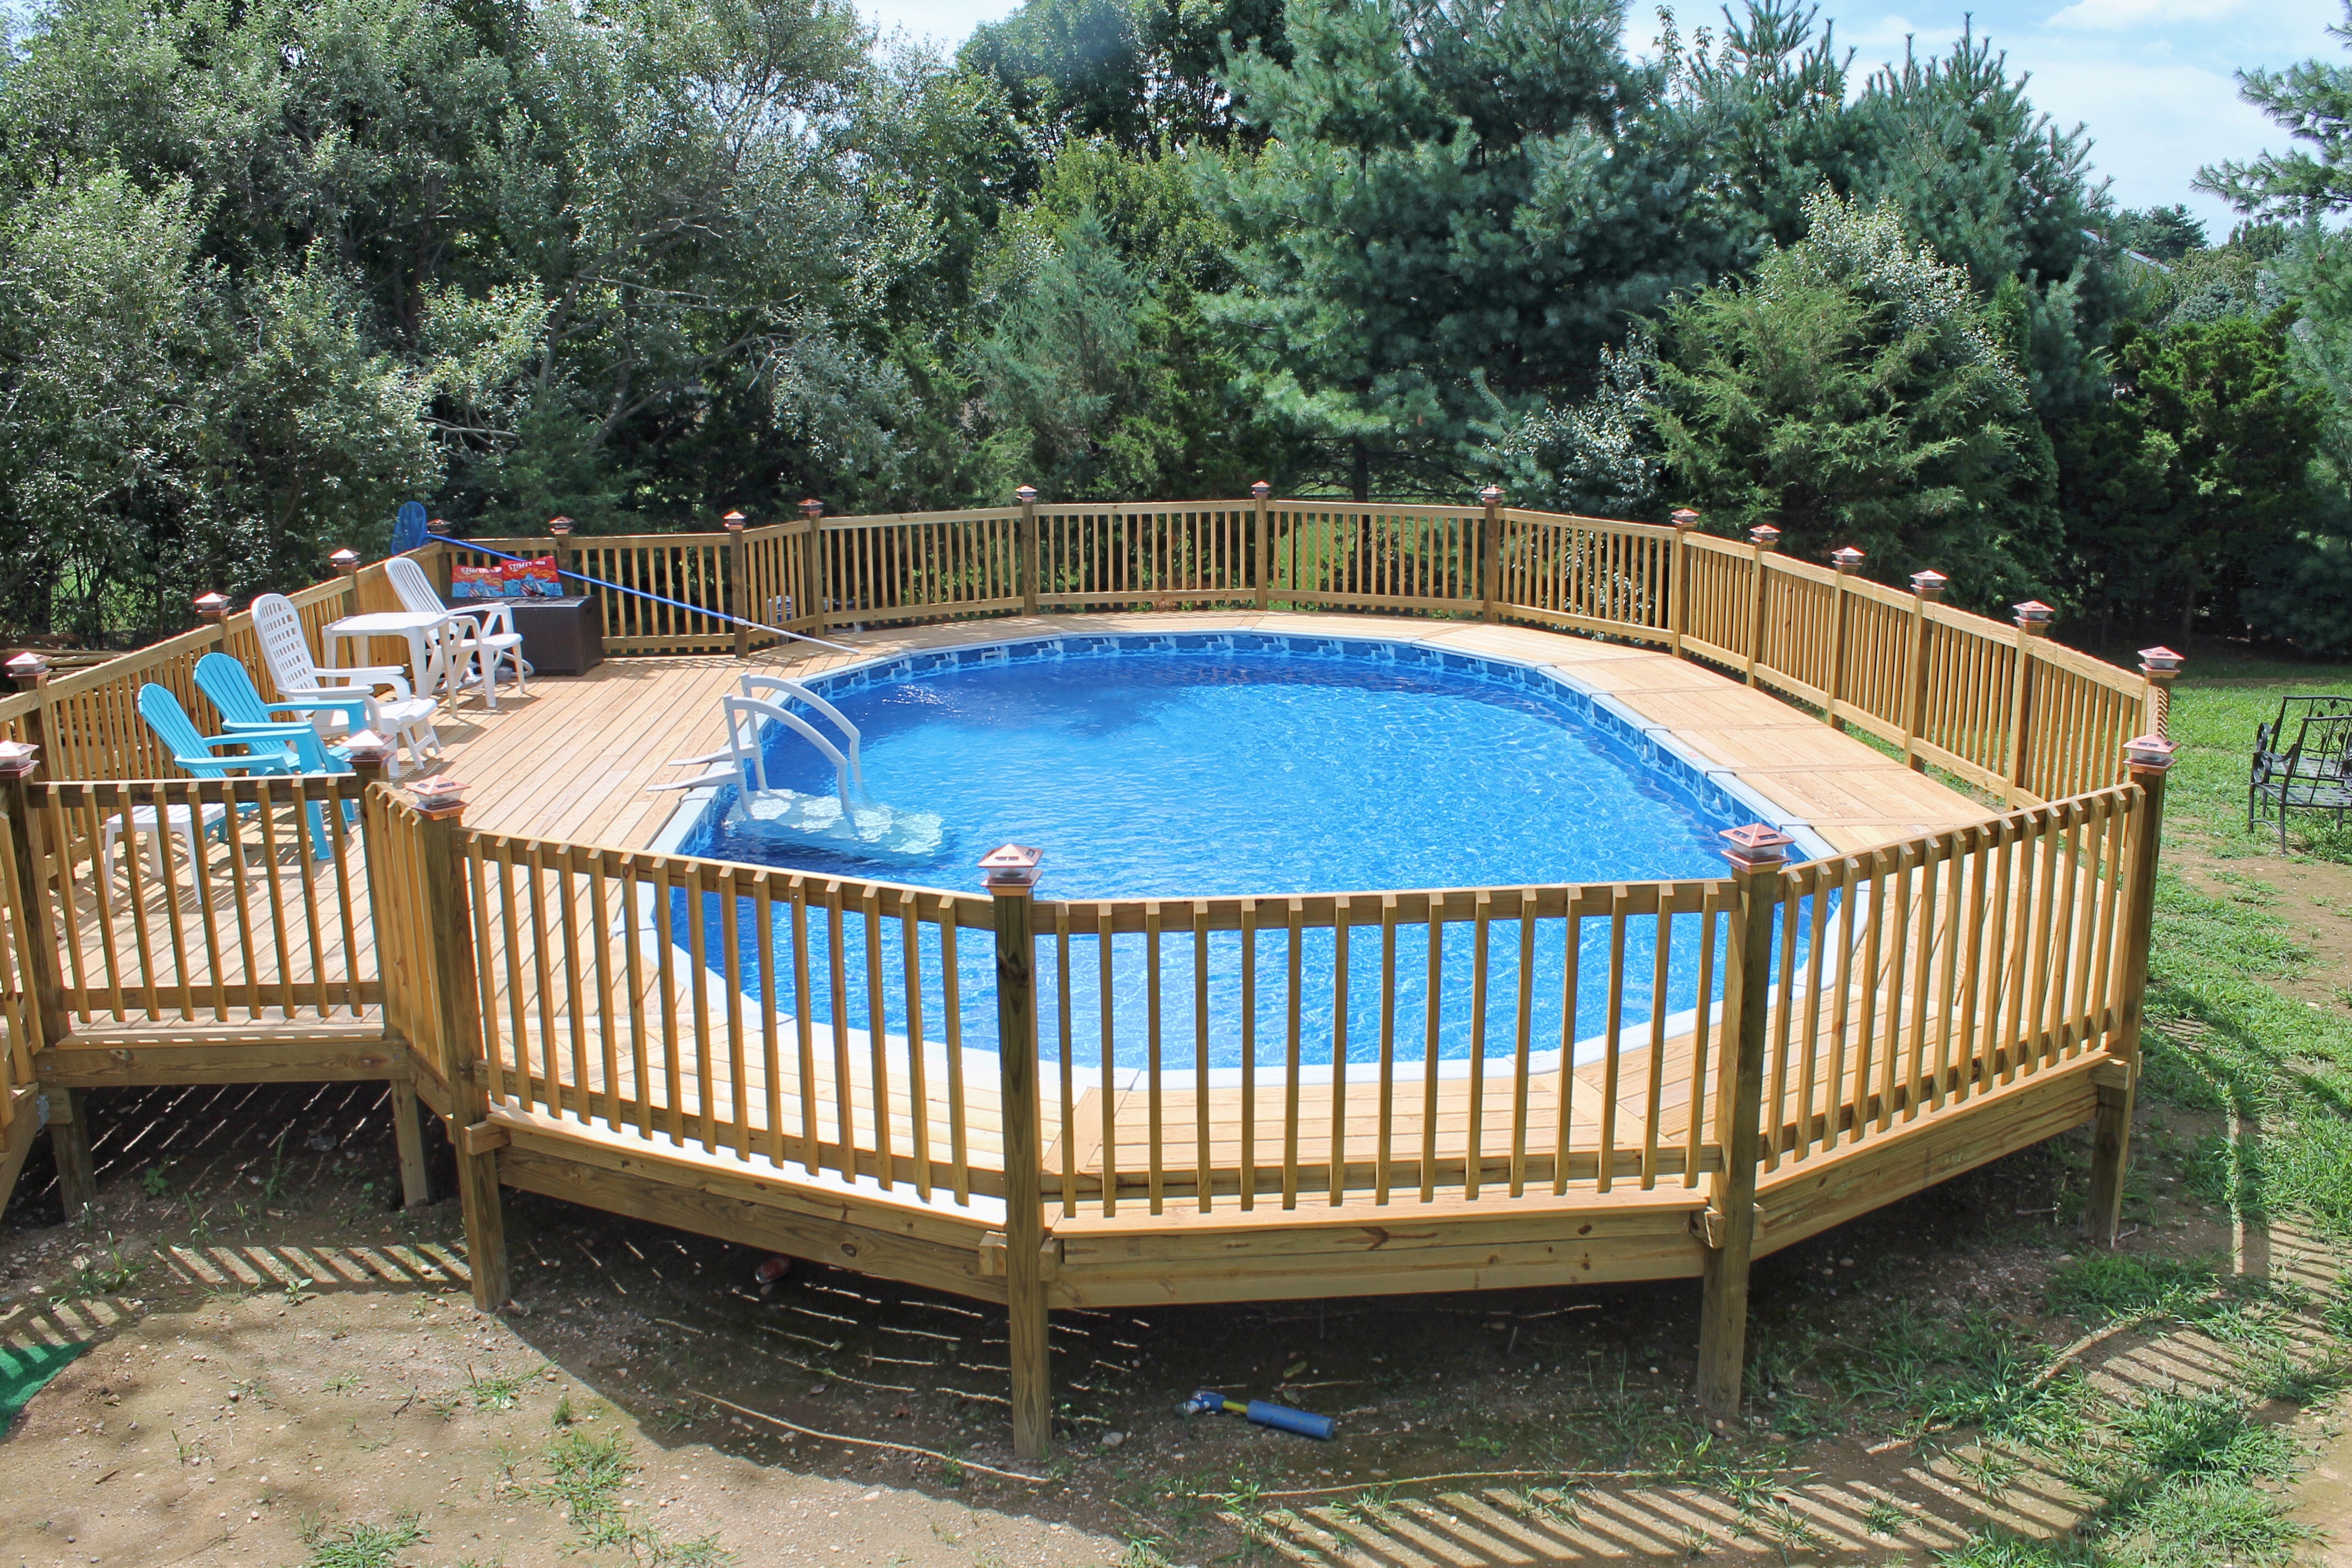 Above Ground Pool Installation Cost, Above Ground Pool With Deck Around It Cost